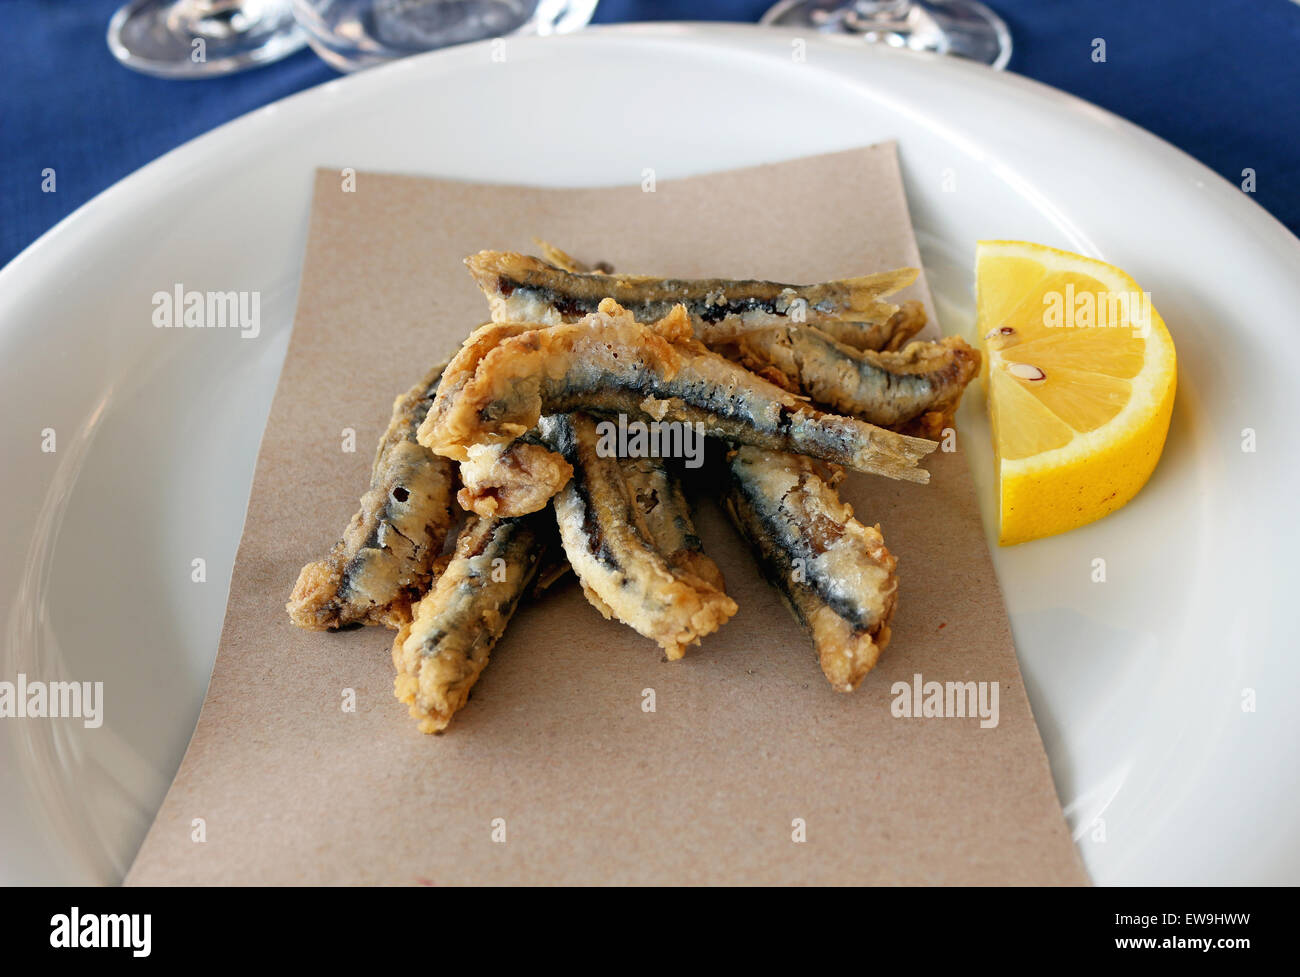 Fried anchovies with lemon on a plate Stock Photo